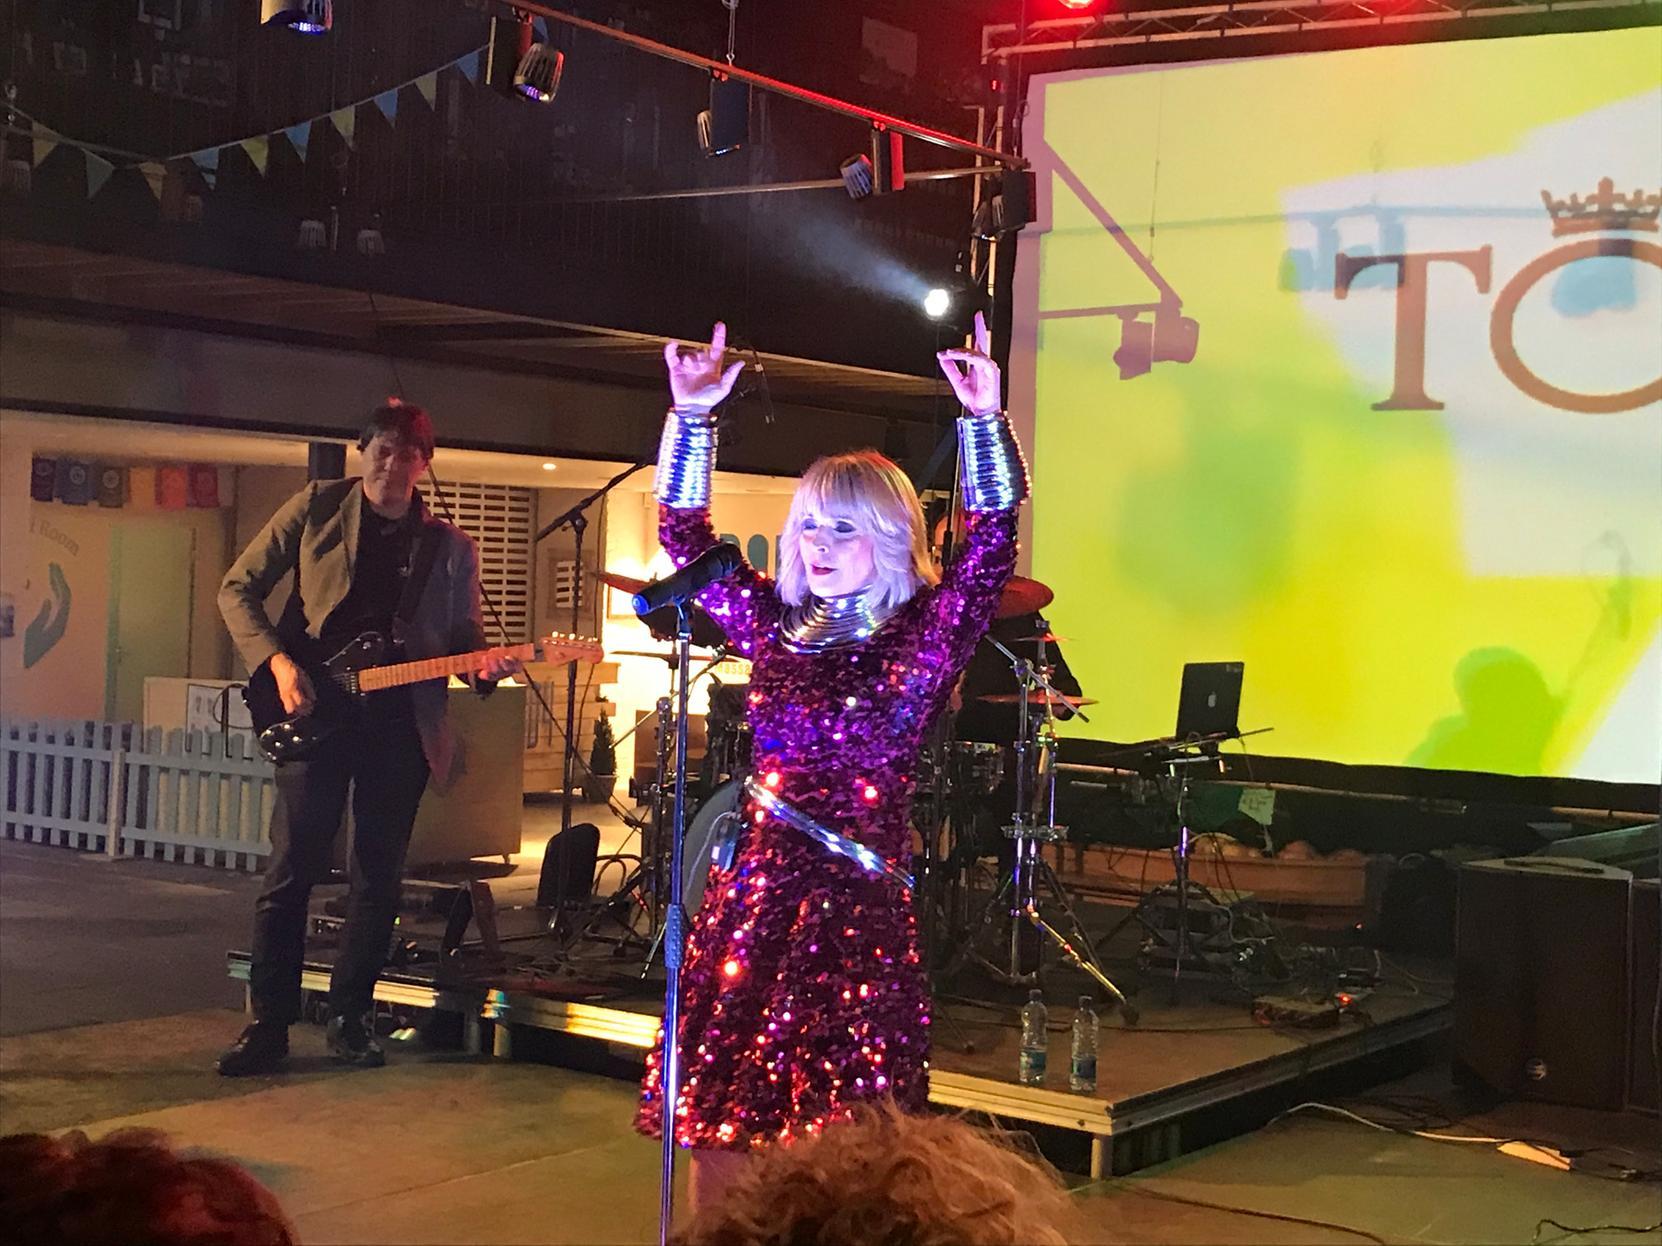 Two 'non-Toyah' songs really fired up the audience - Echo Beach (she took the Martha and the Muffins song back into the charts in 1987) and Billy Idol's Rebel Yell